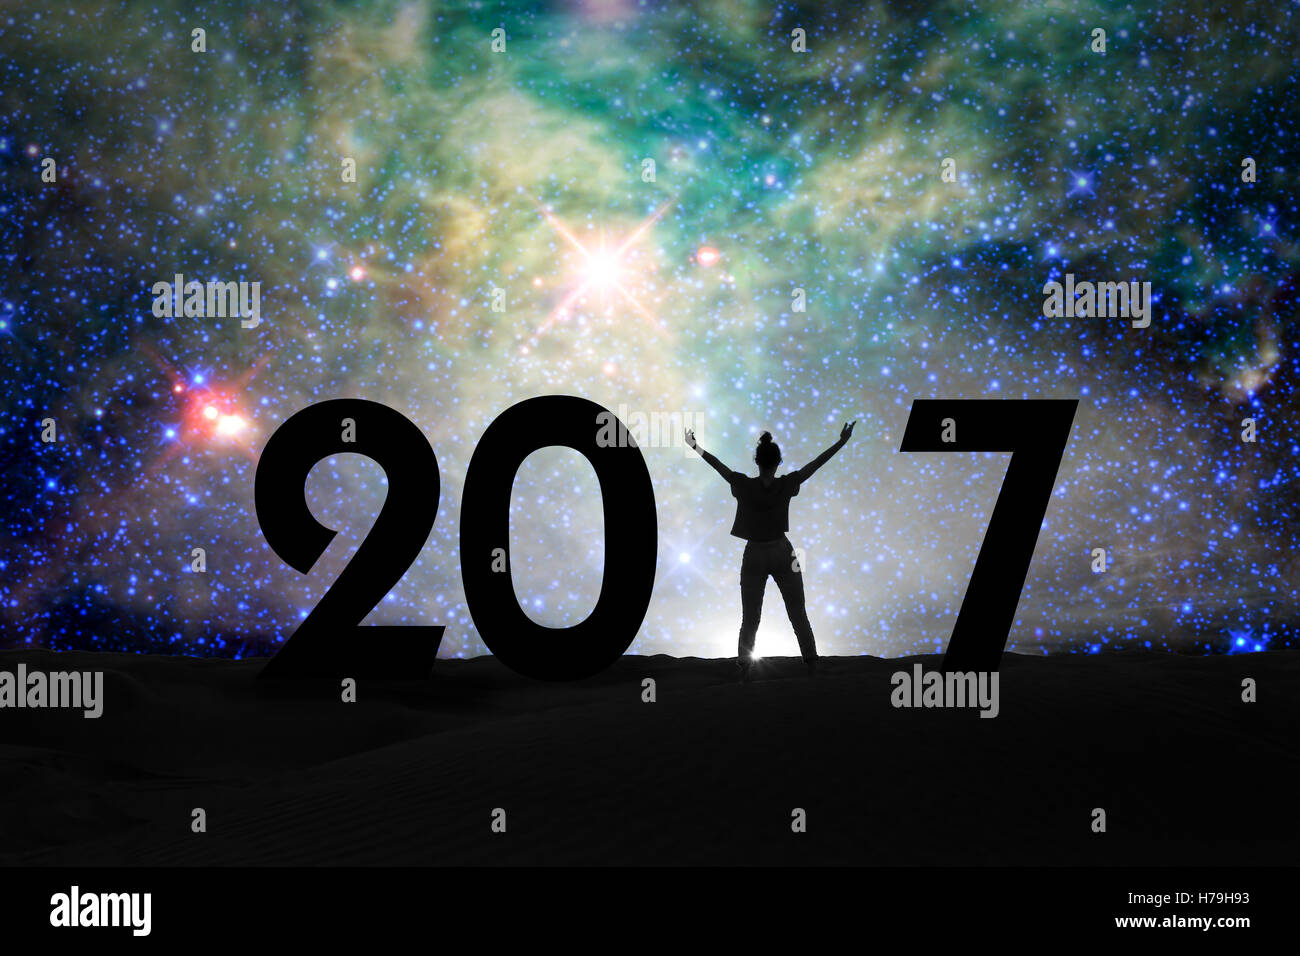 2017, silhouette of a woman and starry night, 2017 new year concept Stock Photo